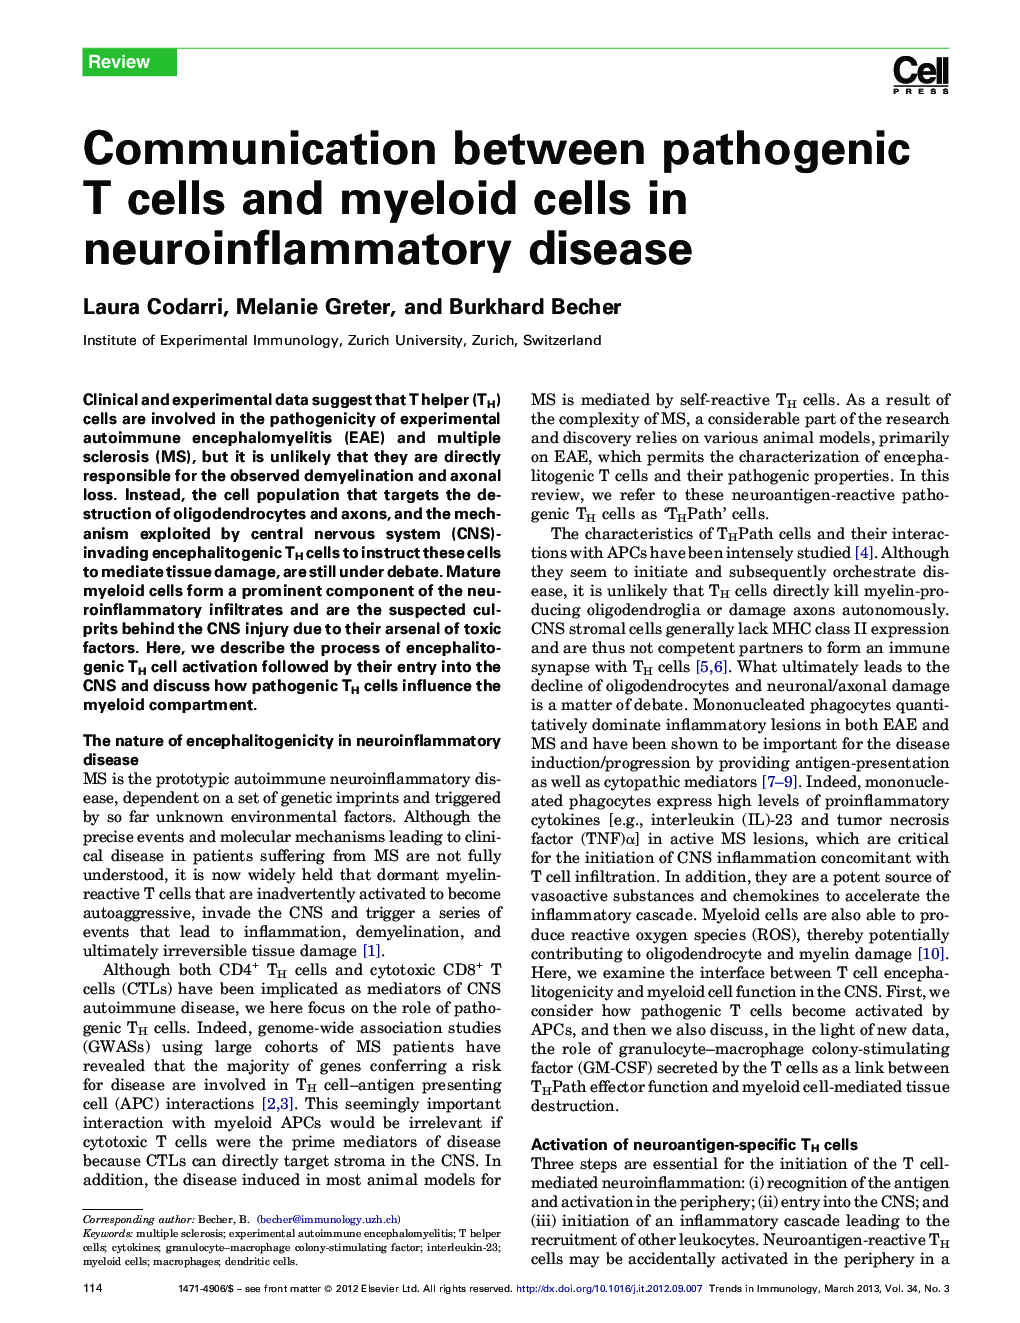 Communication between pathogenic T cells and myeloid cells in neuroinflammatory disease